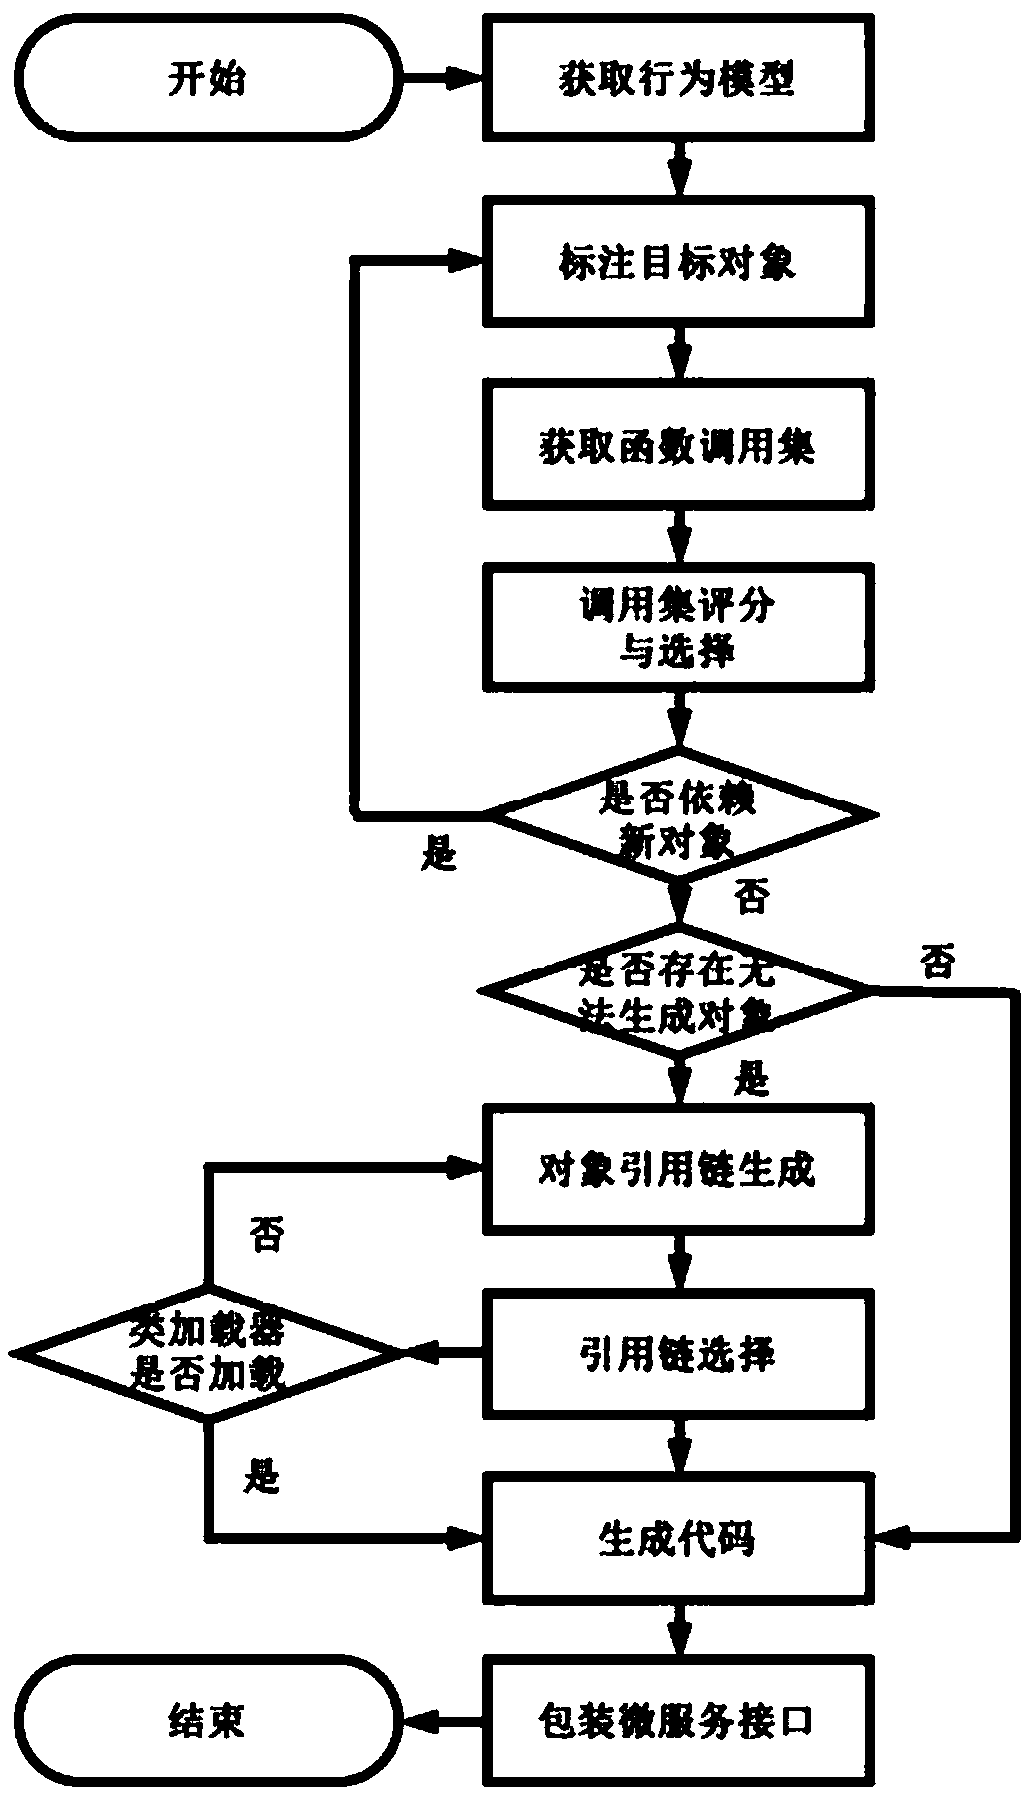 Method and system for generating function call code based on call stack and dependent path